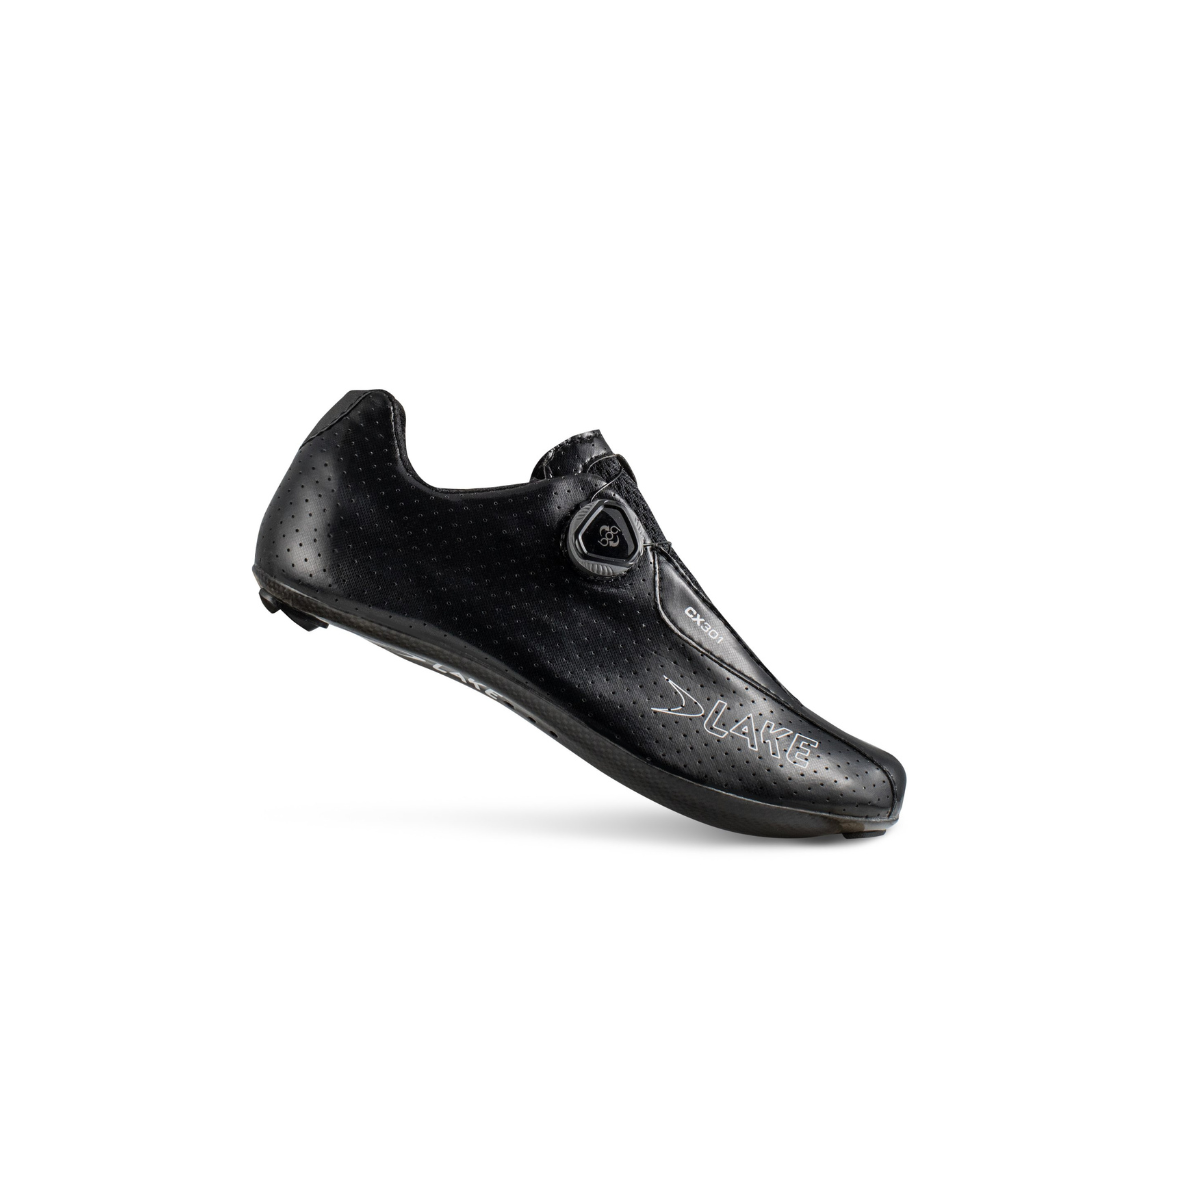 LAKE CX 301 Road Cycling Shoes (Wide Fit) | The Bike Settlement